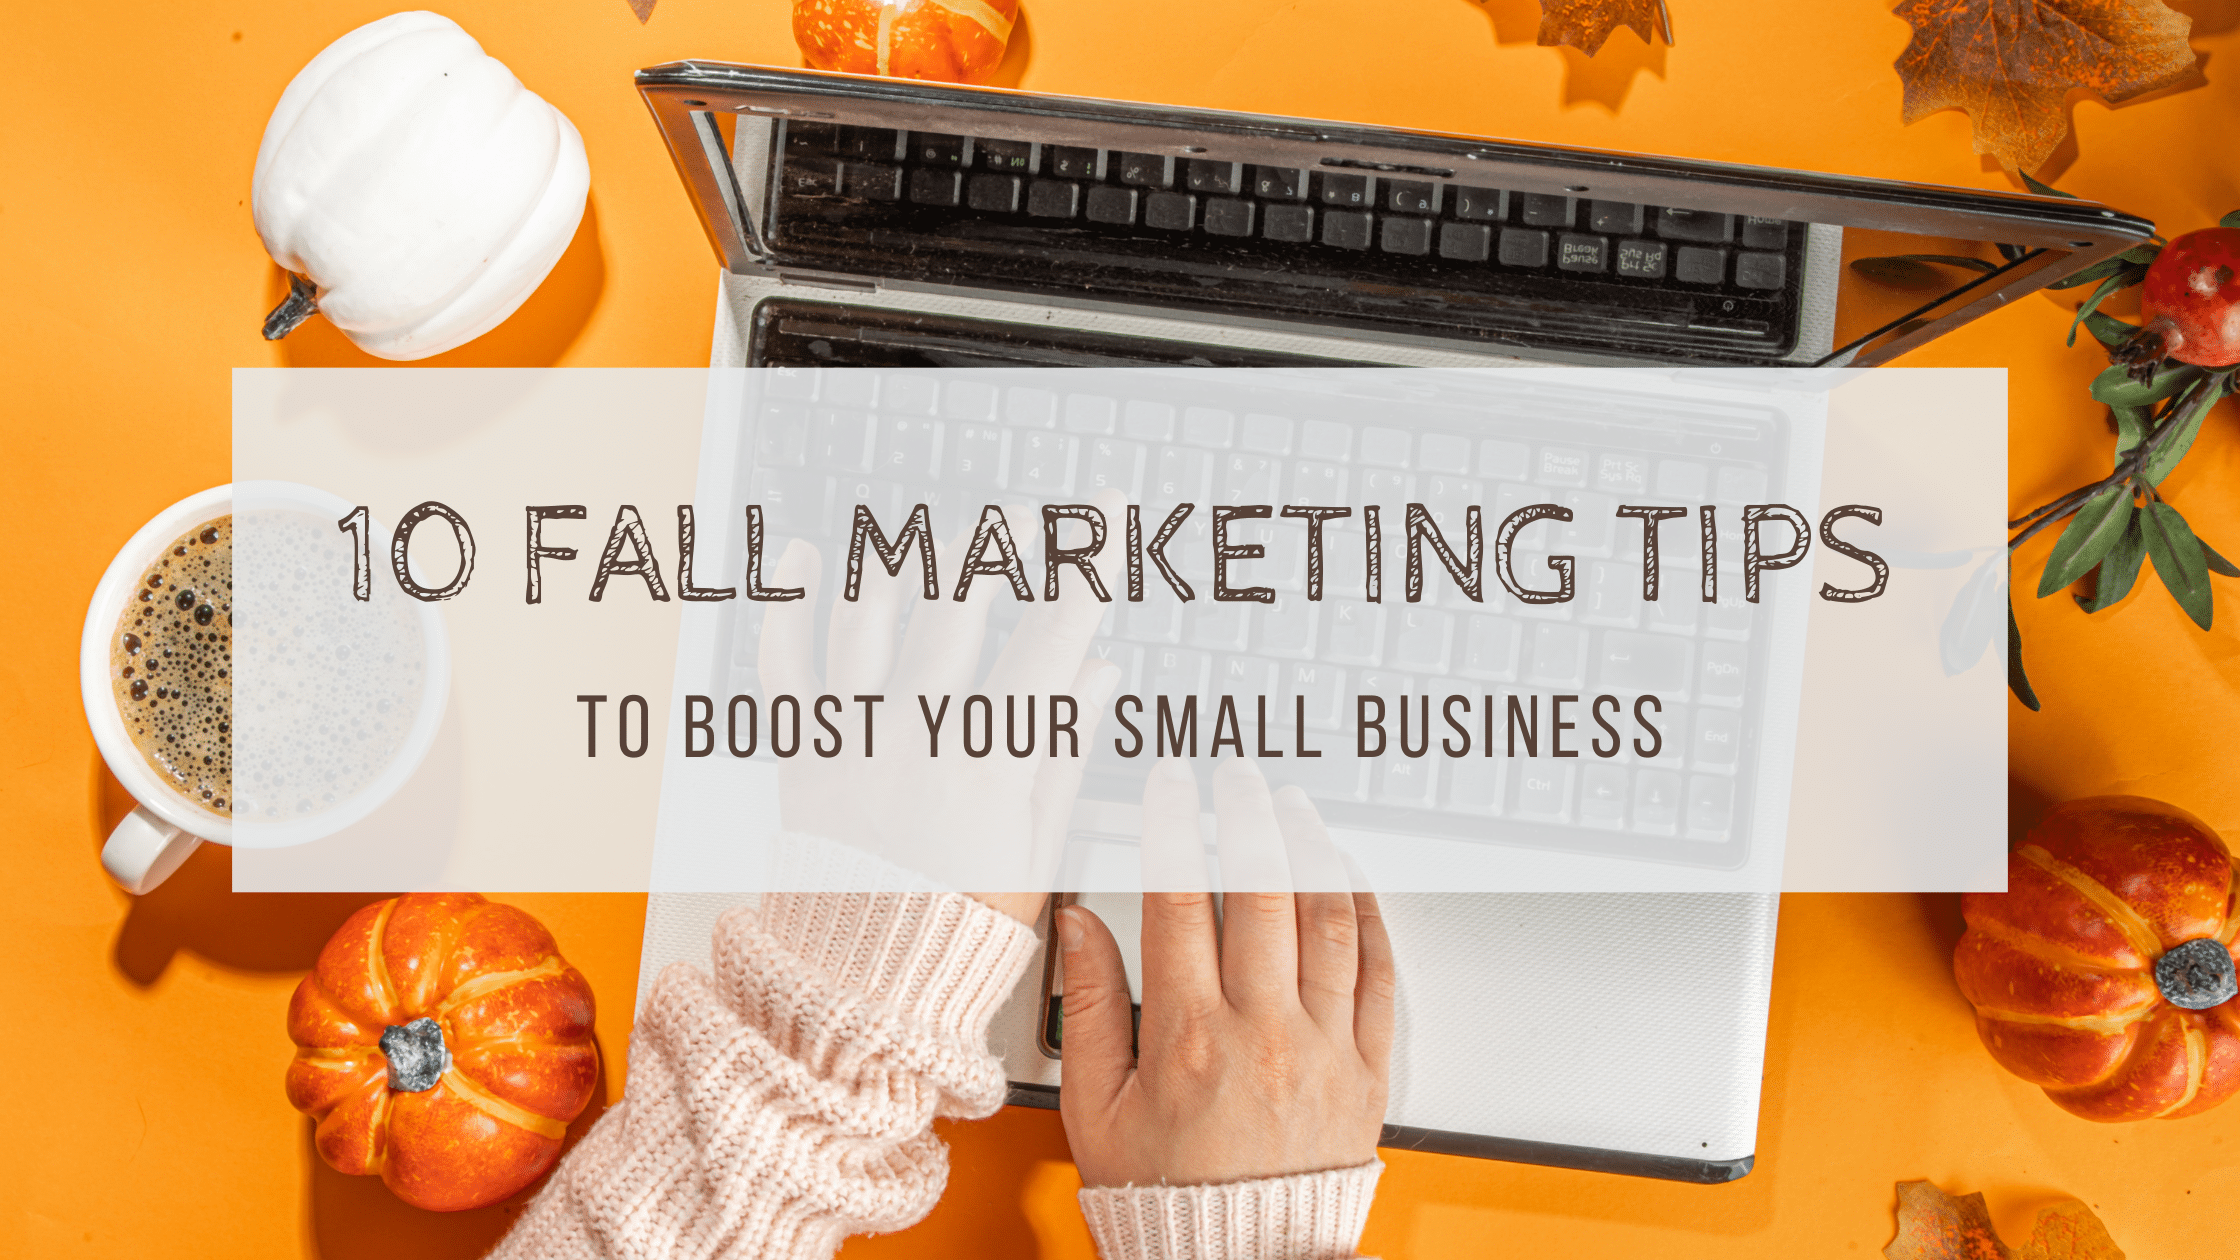 Featured image for “10 Fall Marketing Tips to Boost Your Small Business”